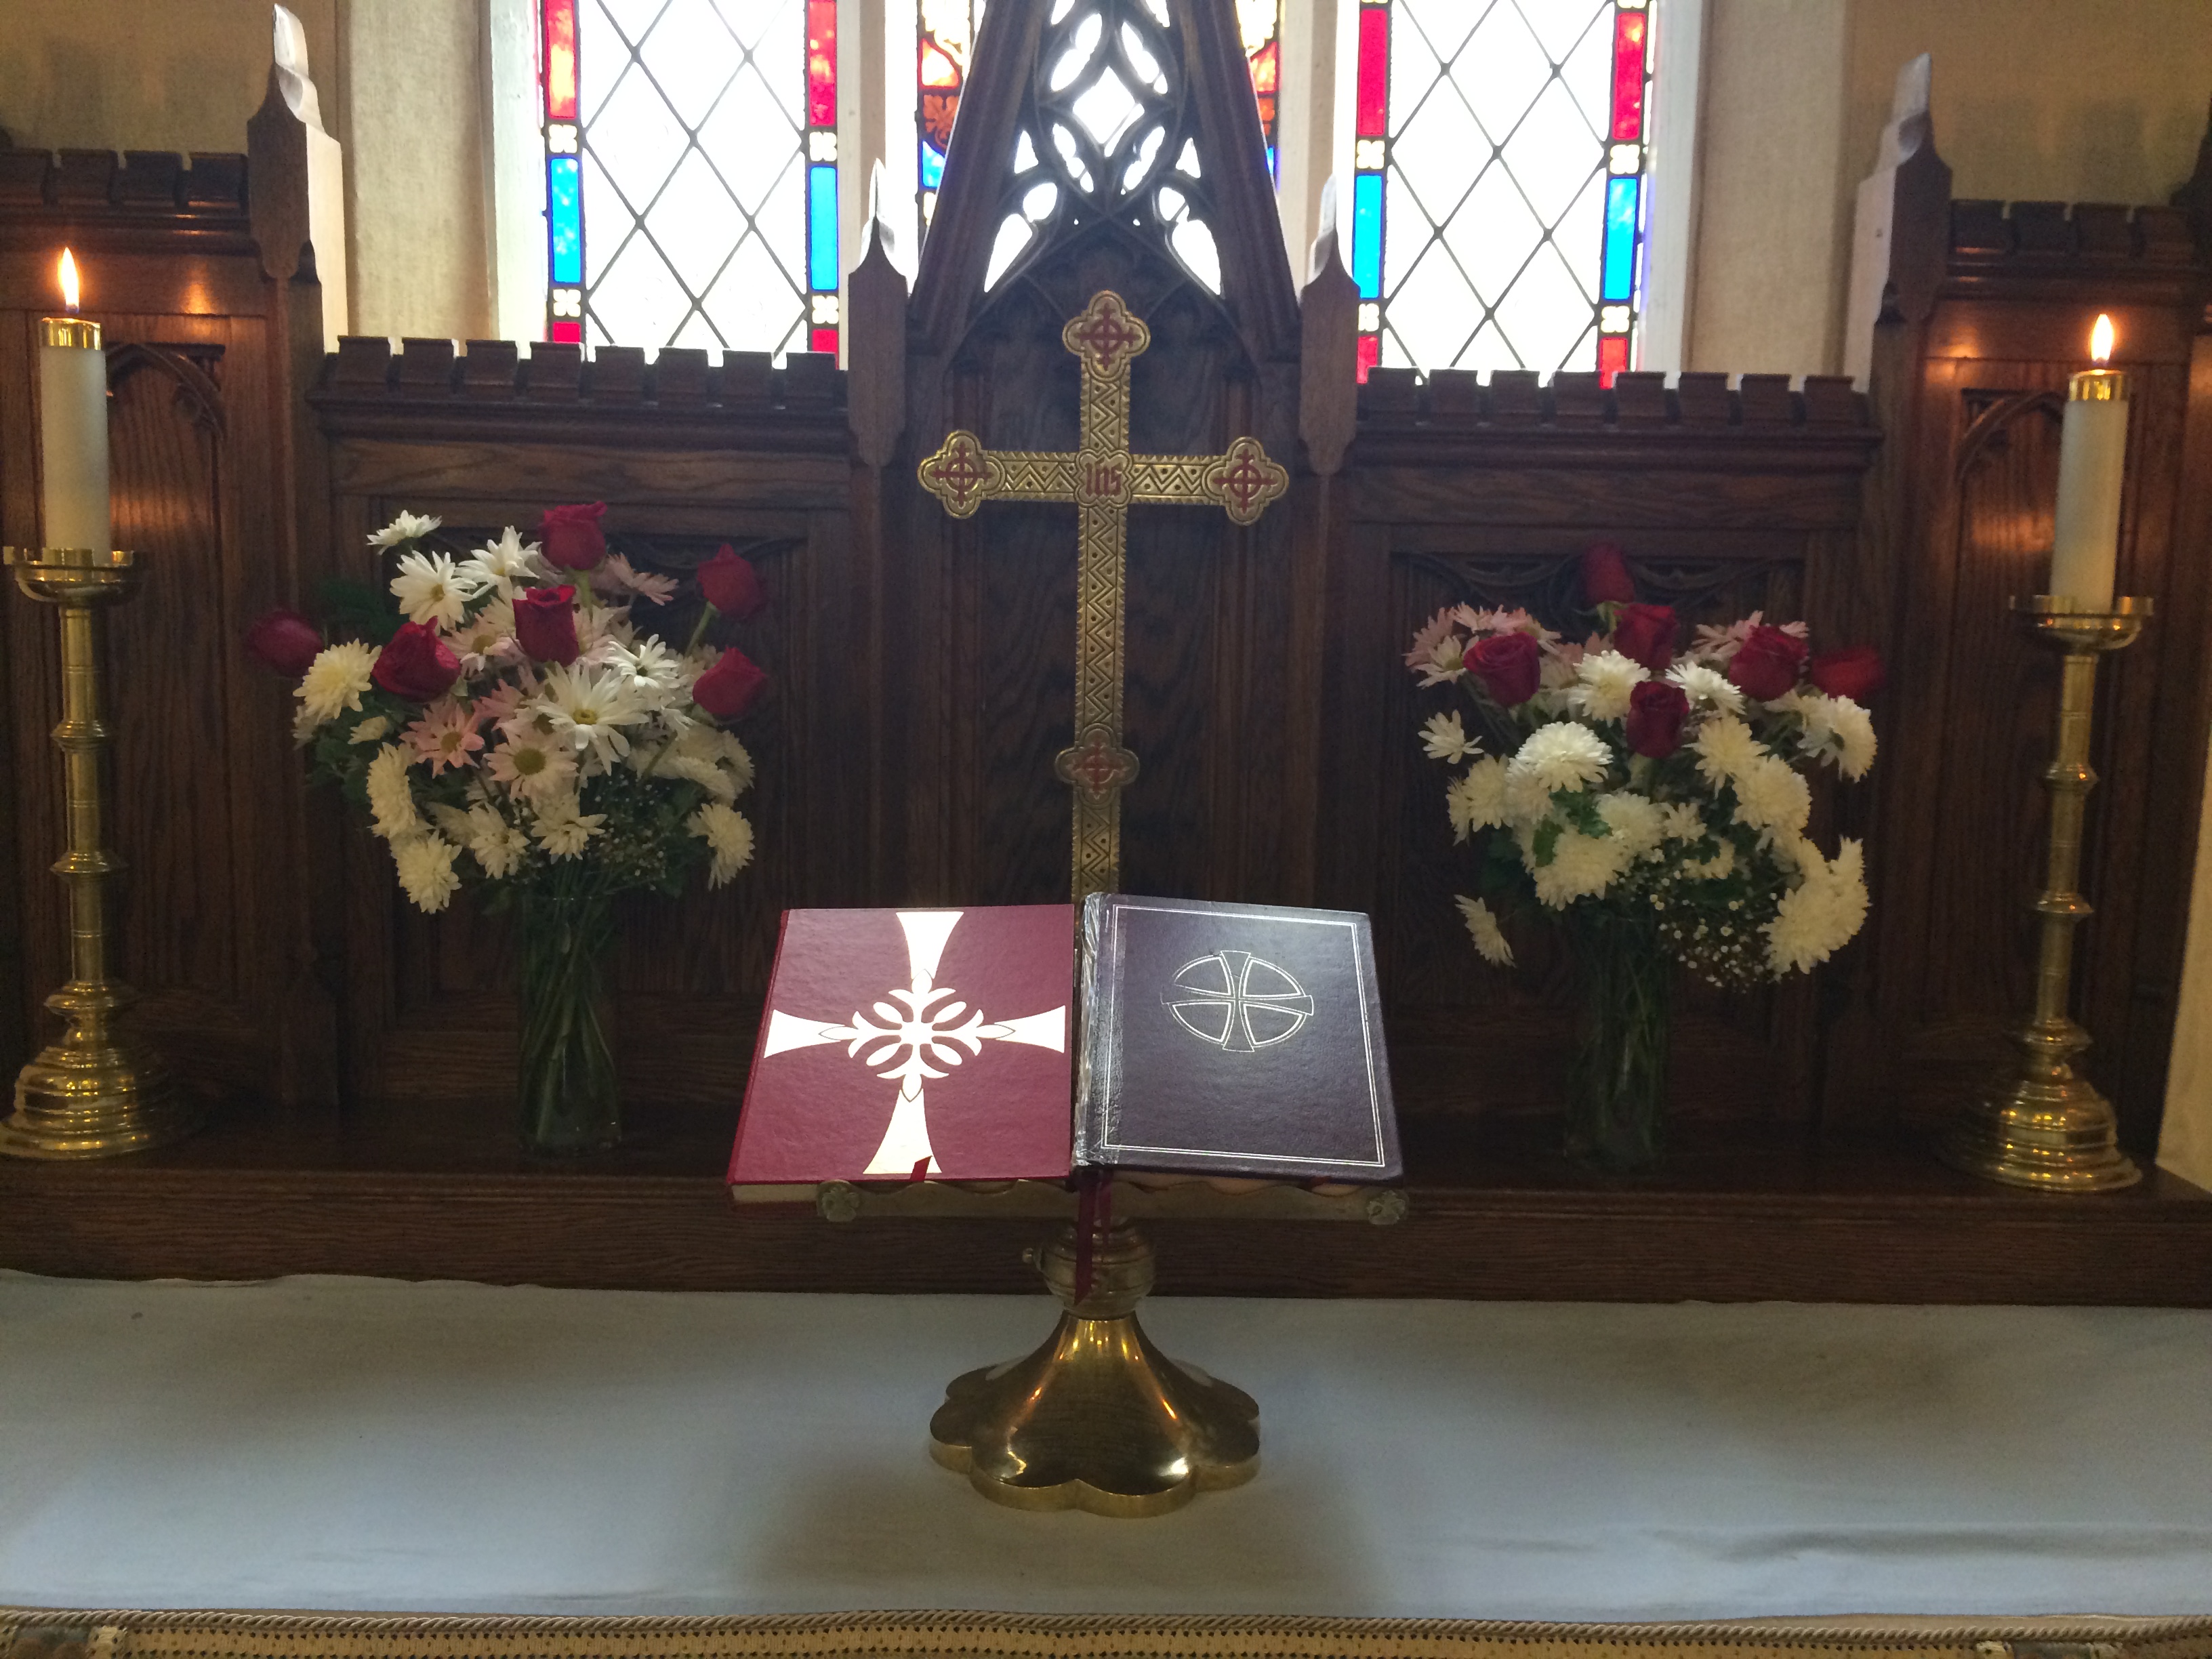 Sunday, November 13th at St. Luke's: Flowers on the Altar are in loving memory of Allana Dauphinee. From Husband Wayne Dauphinee & Family..